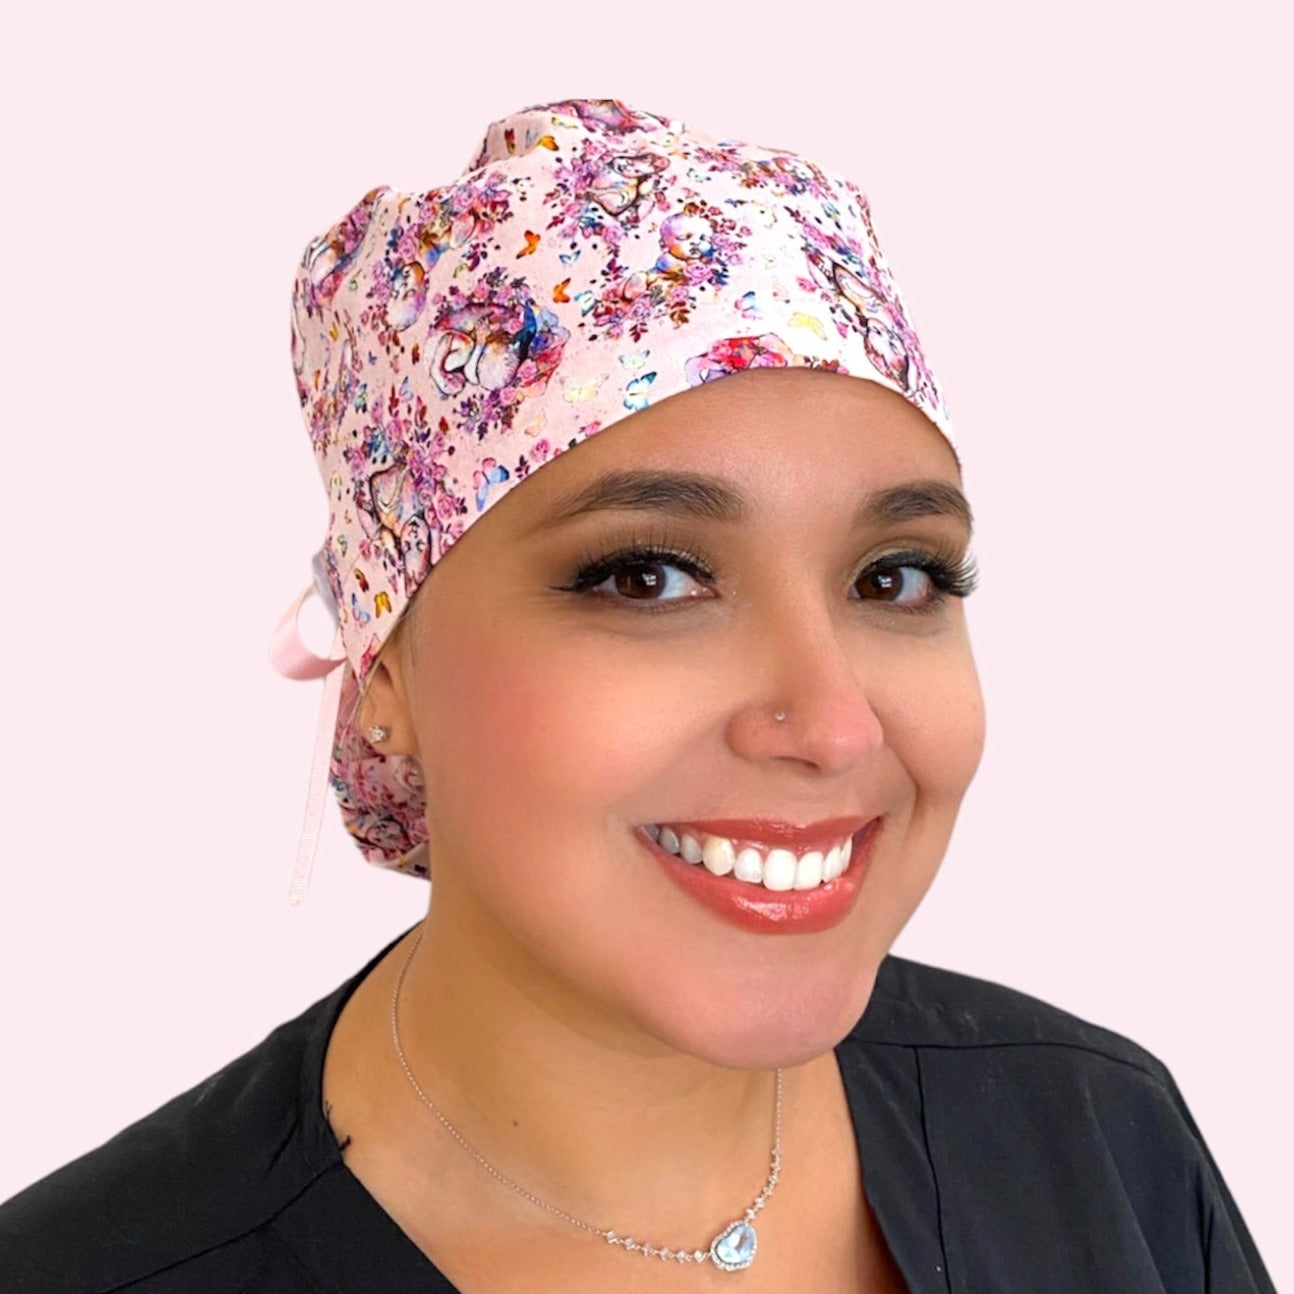 baby ponytail labor and delivery surgical scrub cap by sunshine shops co. available with buttons & satin lining